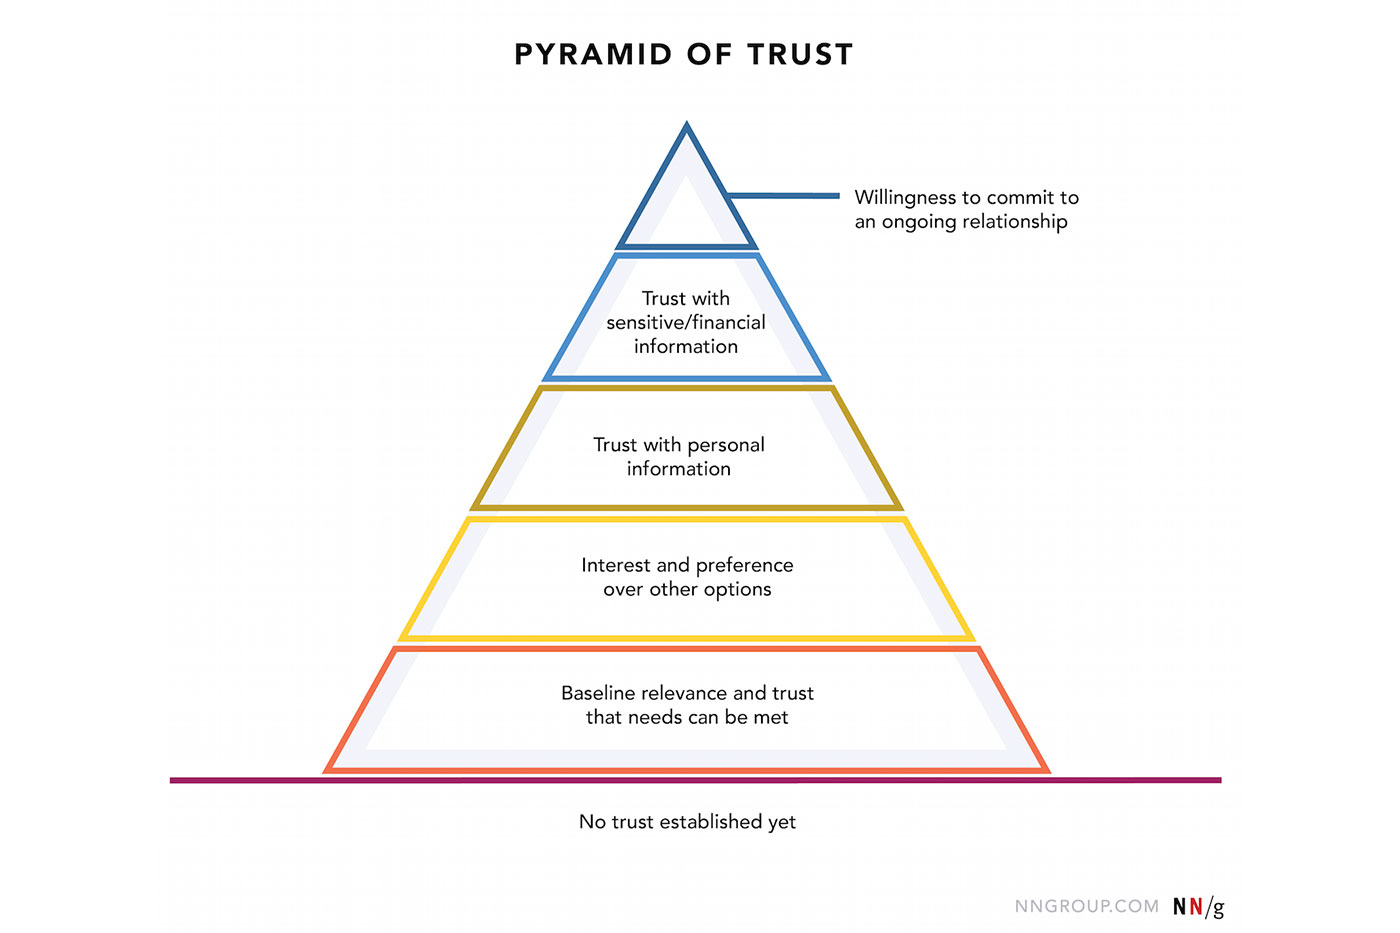 Five levels of the Pyramid of Trust